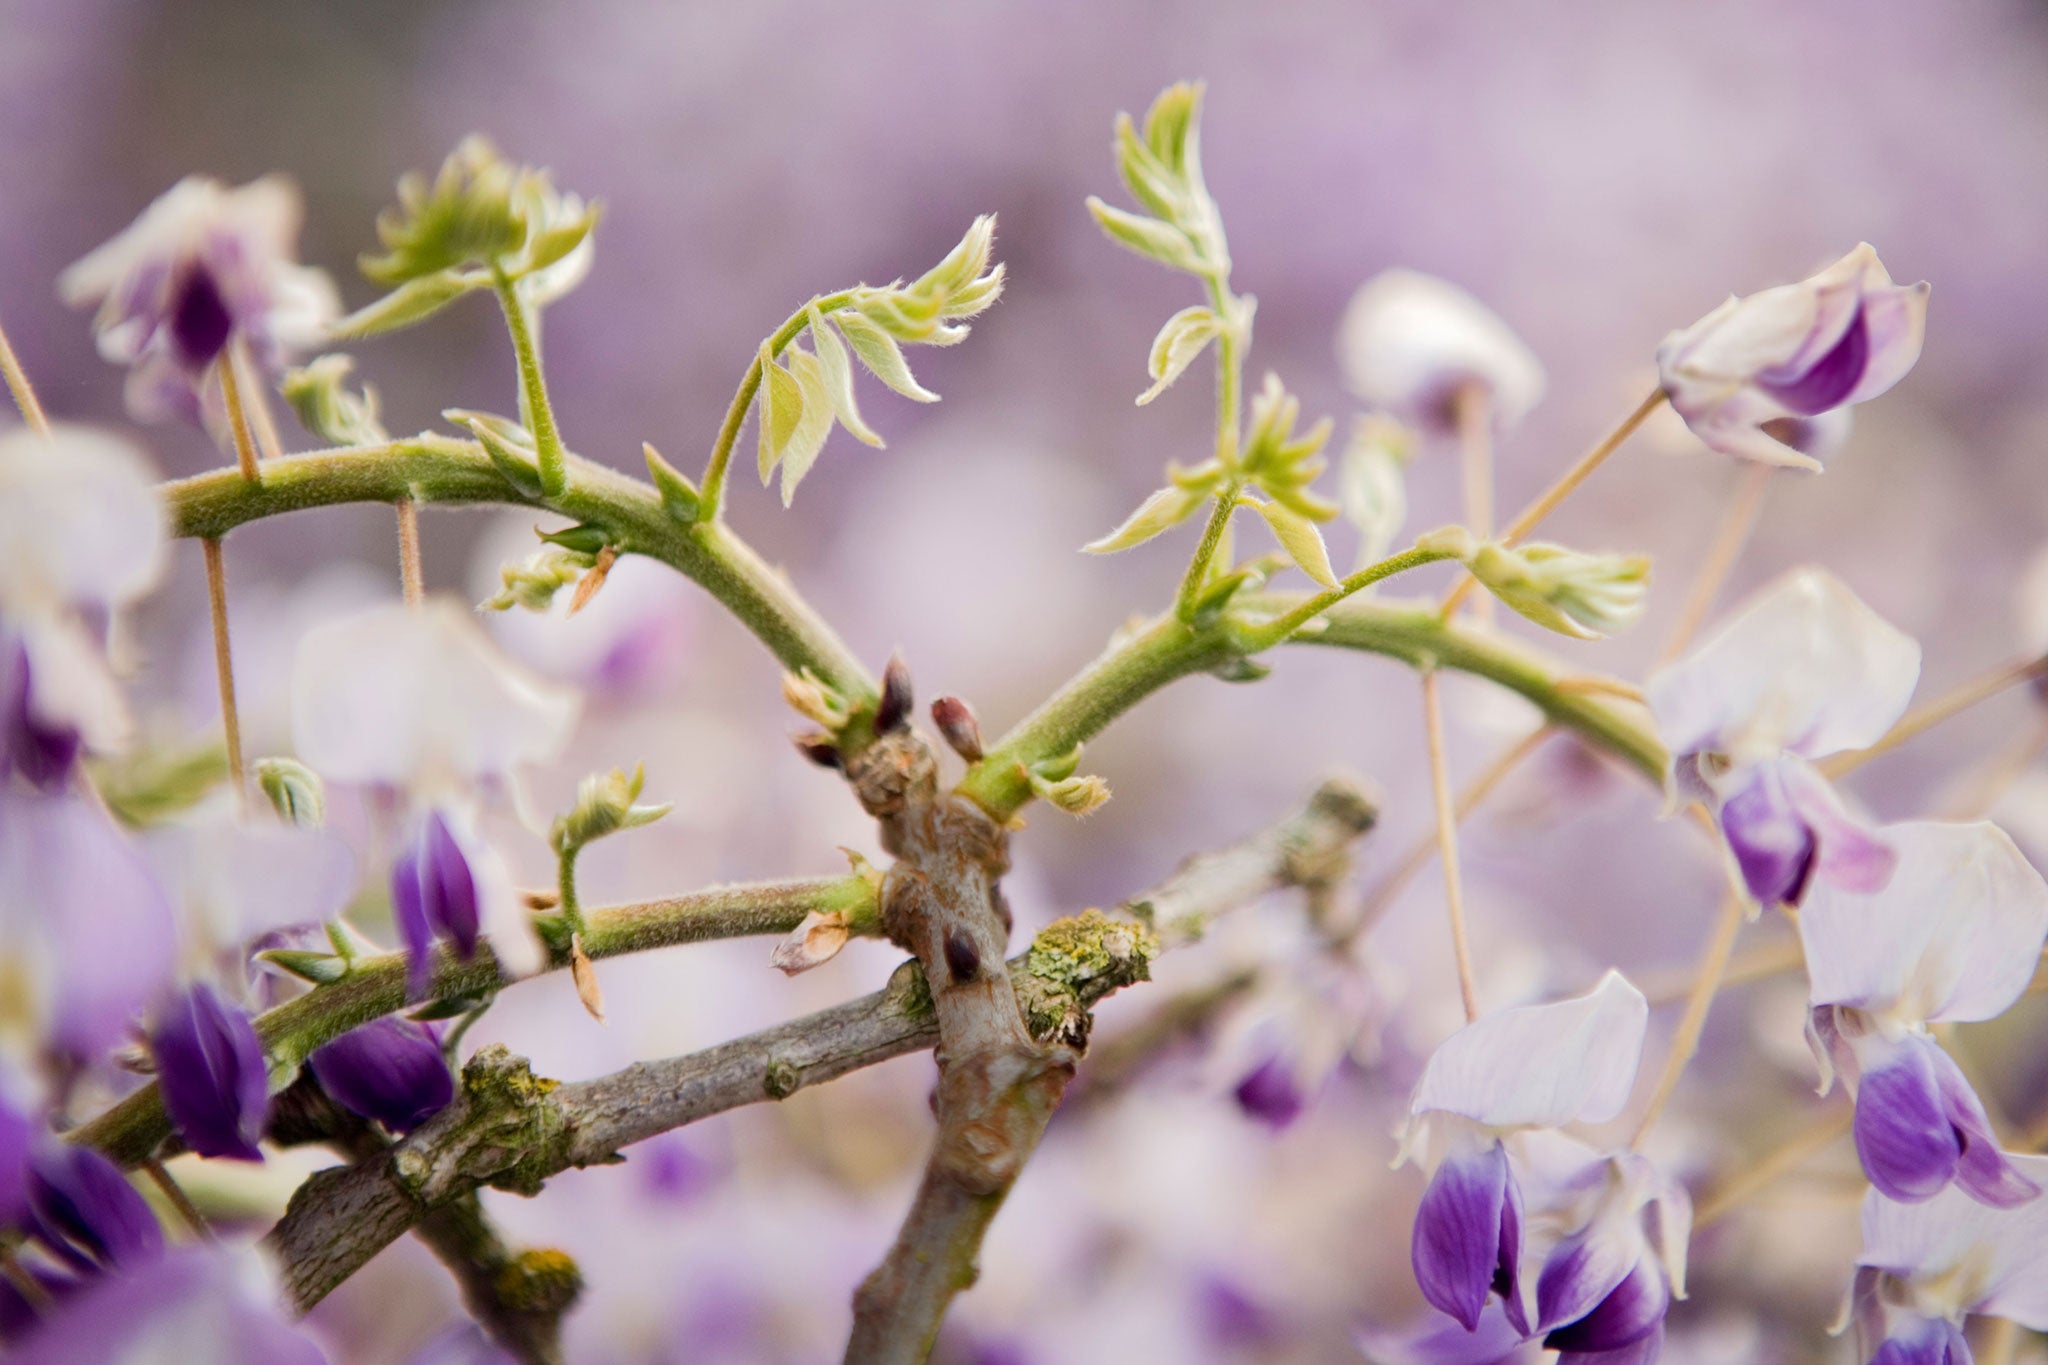 Enhance their performance: New shoots of wisteria